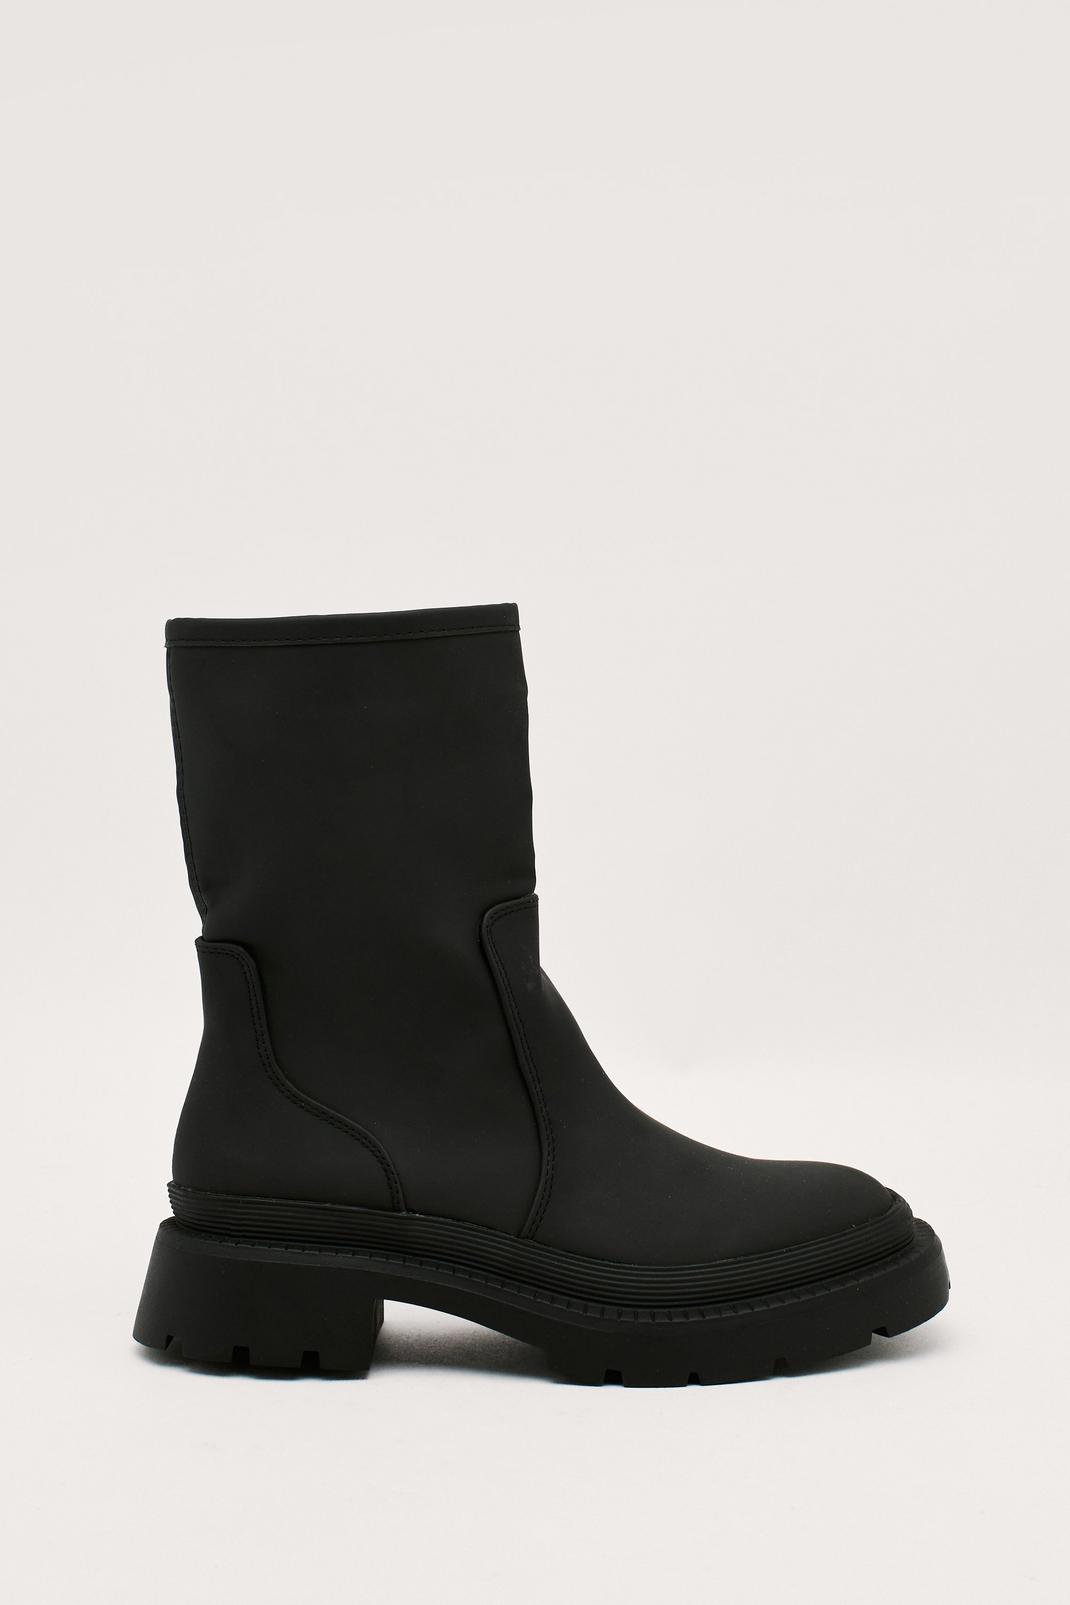 Black Cleated Low Heel Ankle Wellie Boots image number 1